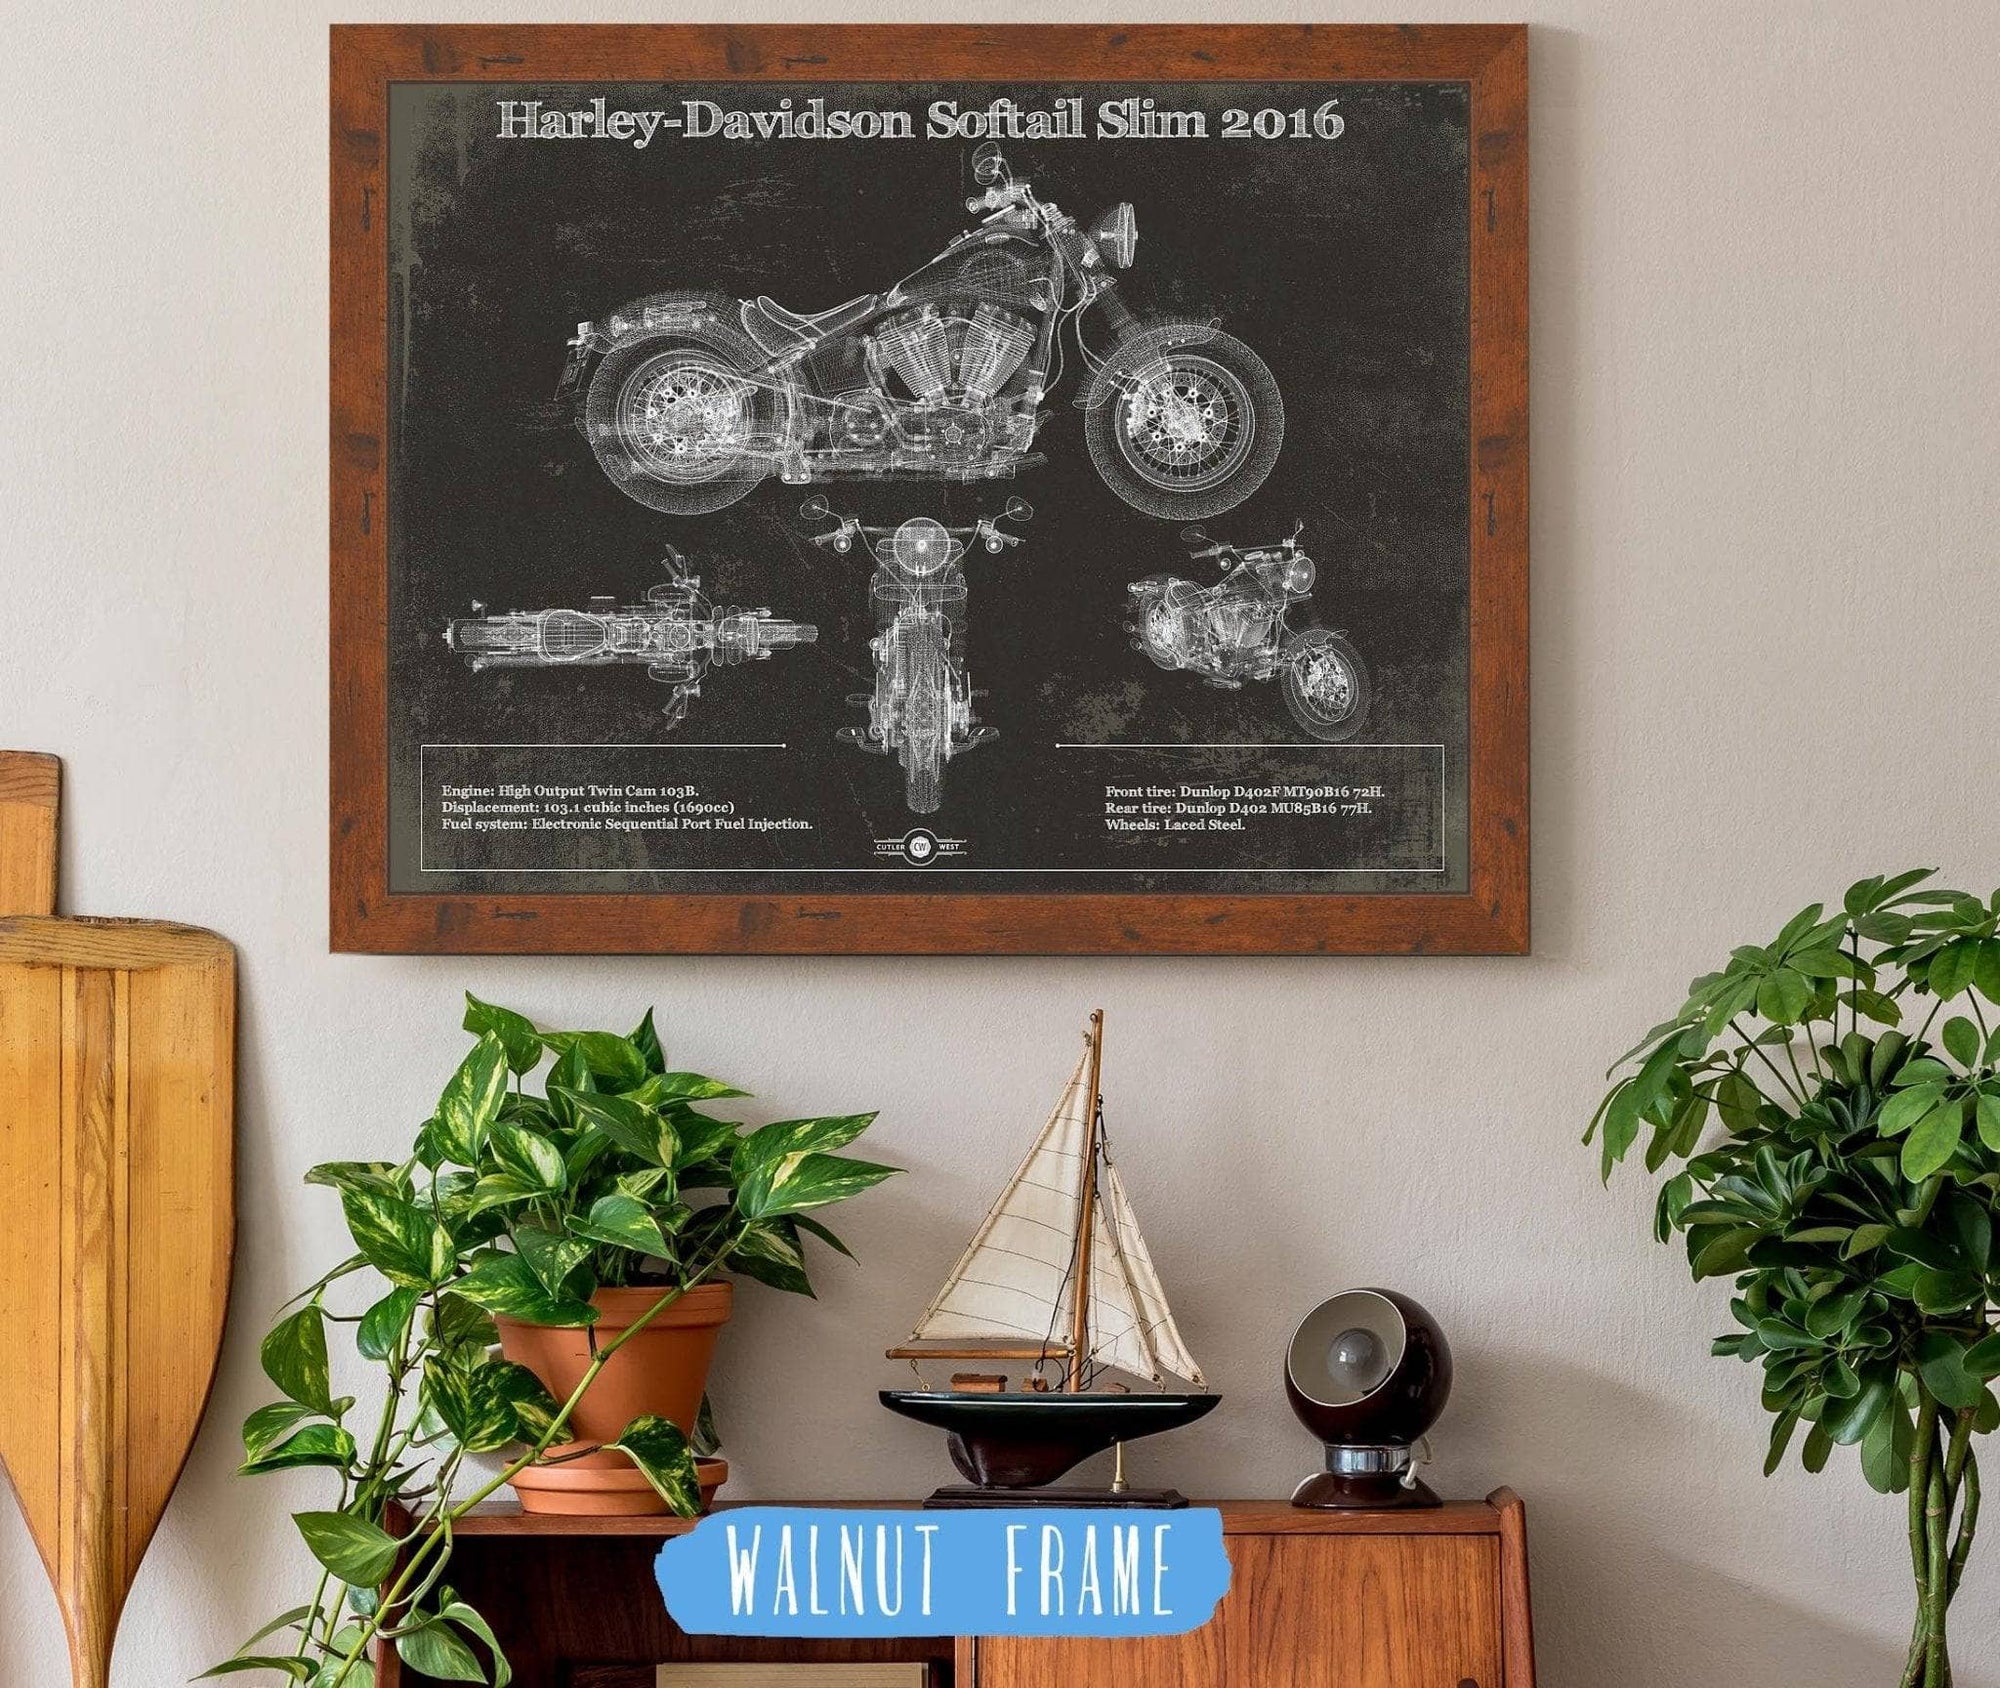 Cutler West Best Selling Collection 14" x 11" / Walnut Frame Harley Davidson Softail Slim S Army Design 2016 Motorcycle Patent Print 845000197_64315